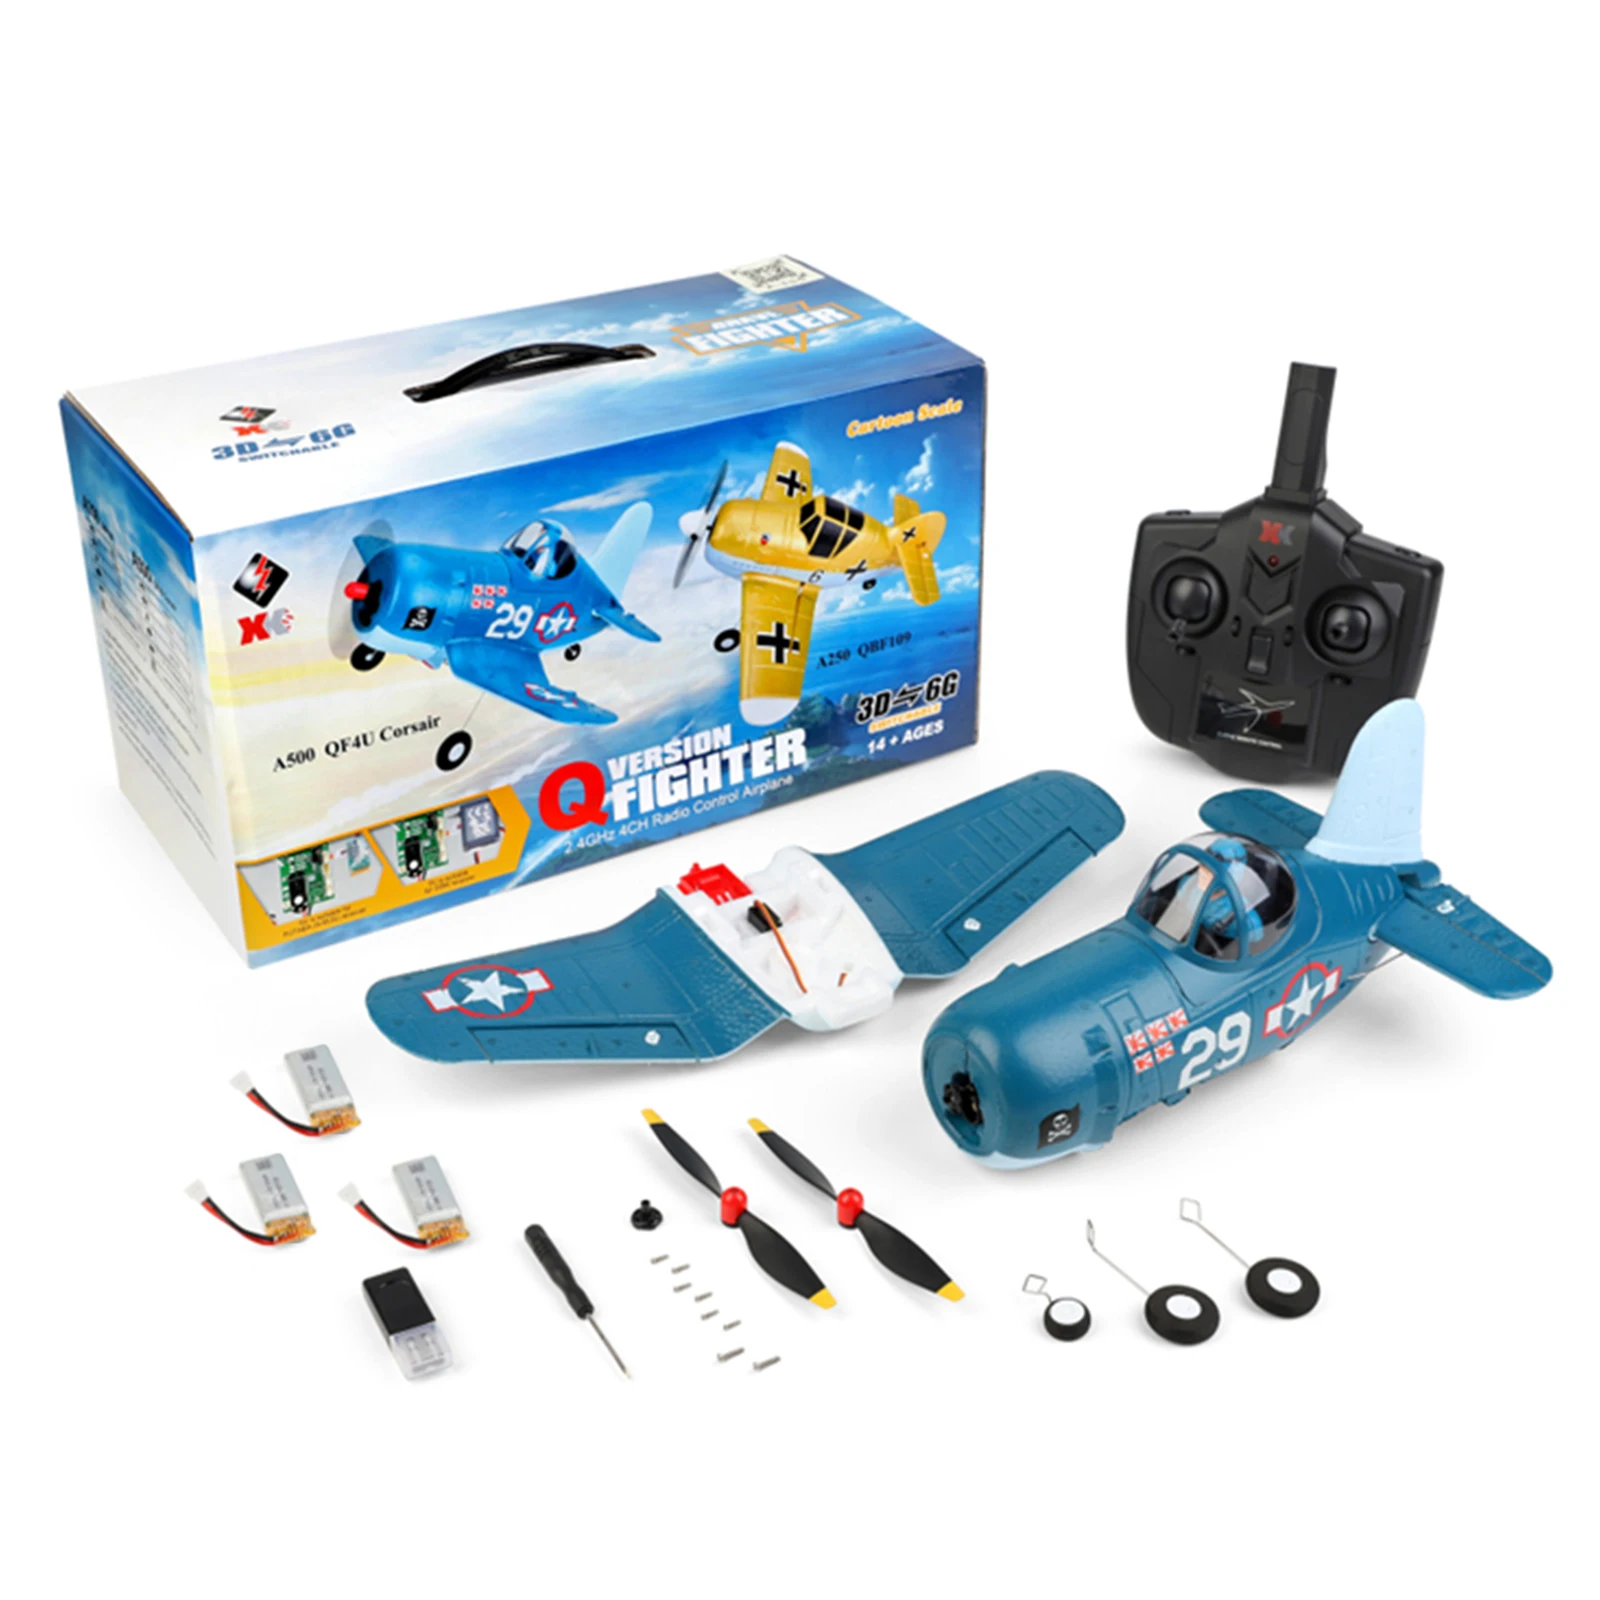 

2.4GHz Remote Control Planes 6-axis Gyroscope 4 Channels RC Fighter Airplane 6G/3D Modes RC Aircraft Plane EPP Foam Adults Toys